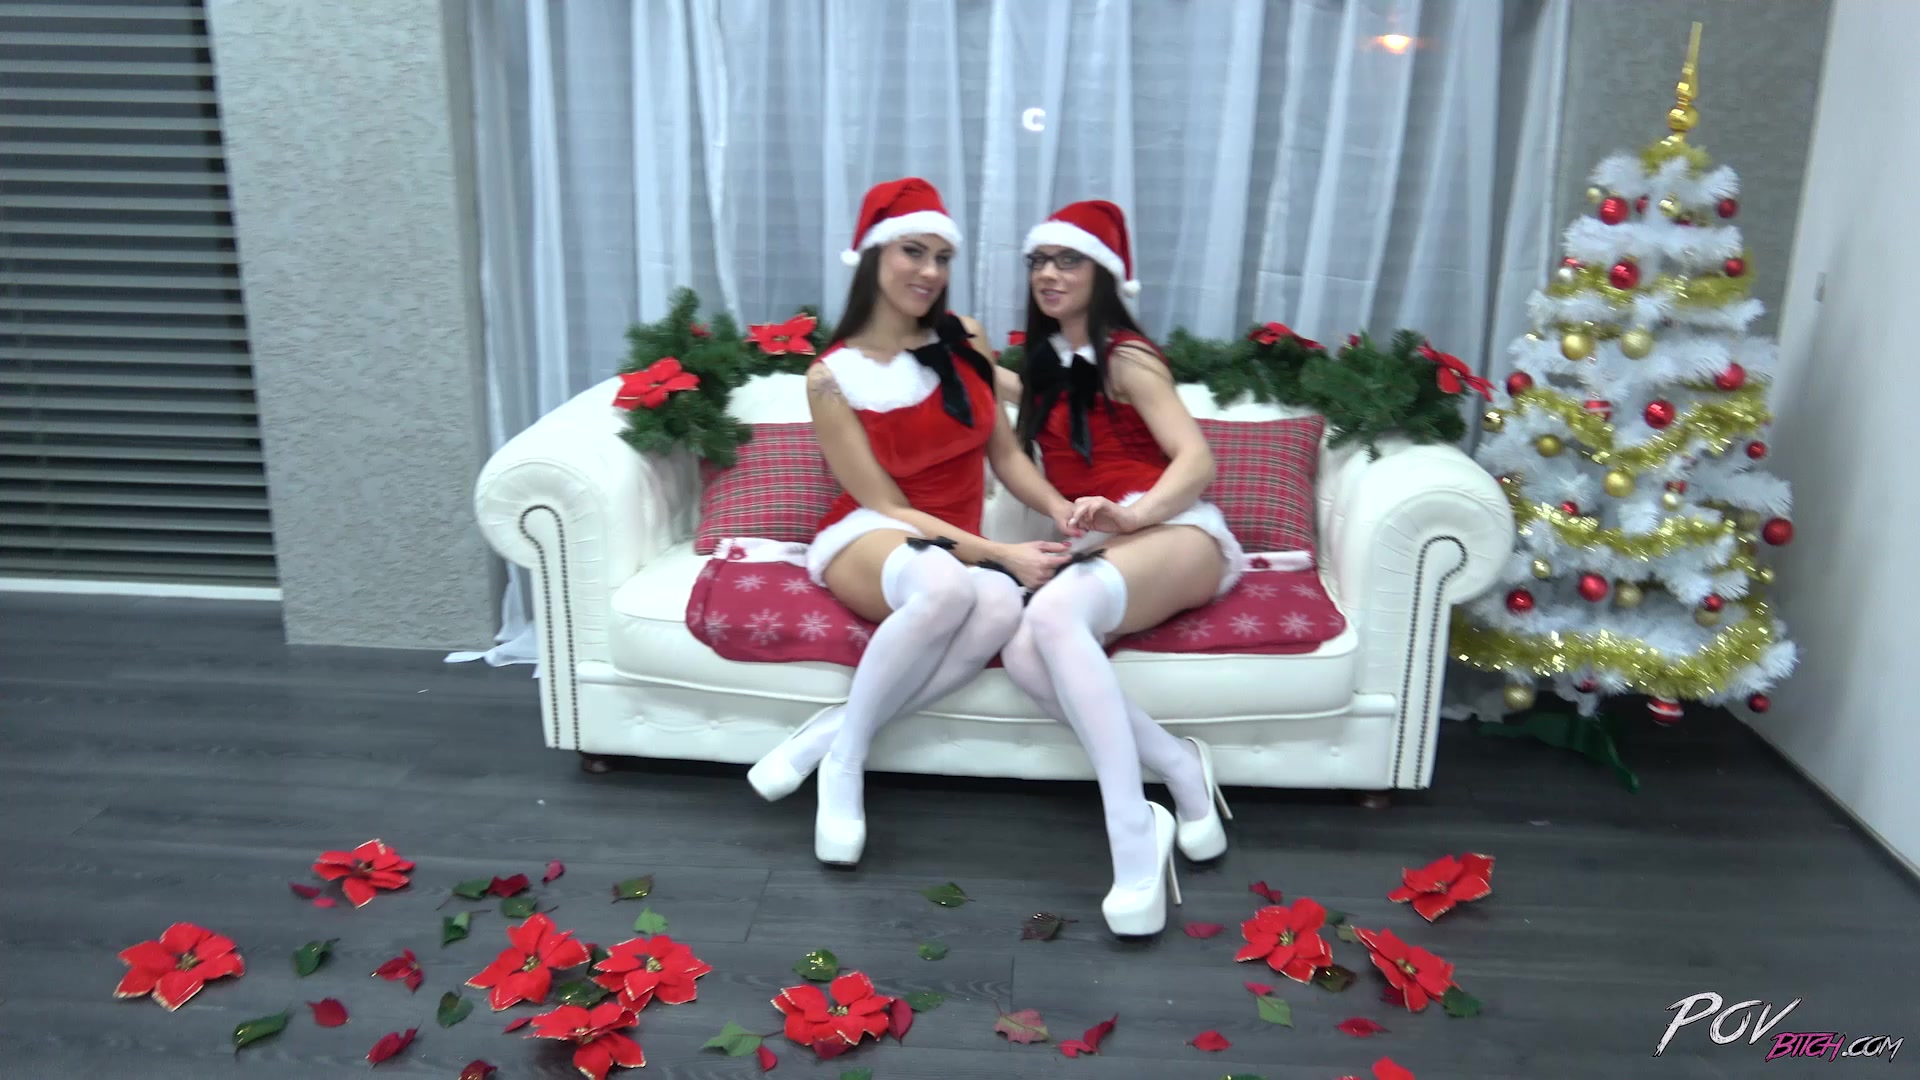 POVBitch - Mea Melone And Wendy Moon Christmas Special